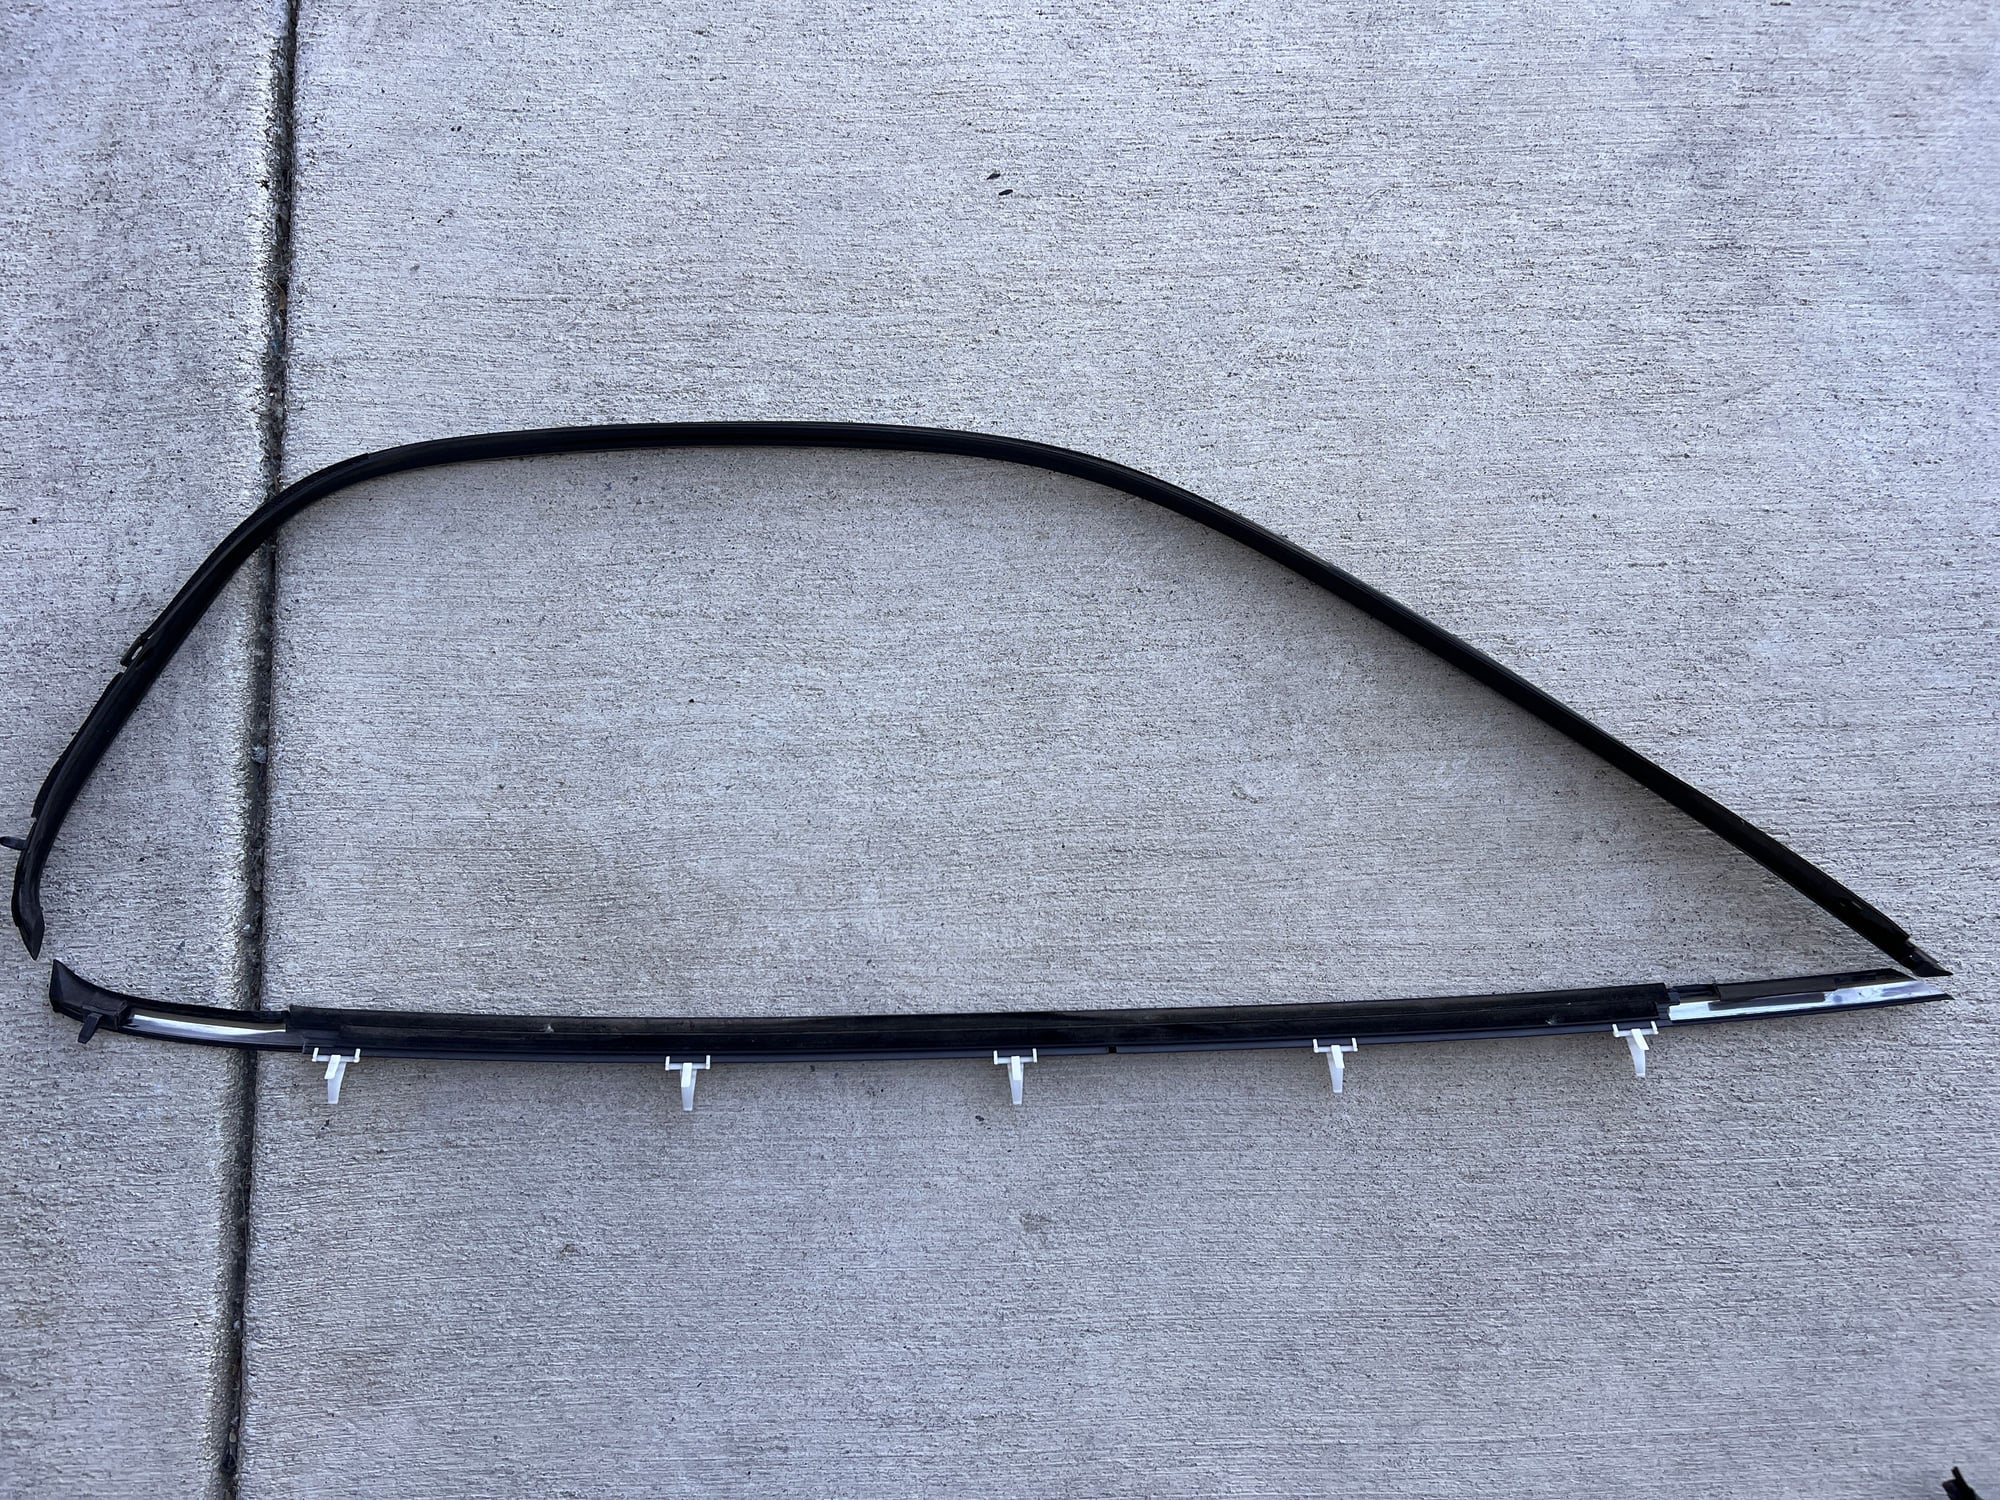 Exterior Body Parts - Drivers side drip and belt moldings - Used - 1993 to 2001 Mazda RX-7 - Vacaville, CA 95688, United States